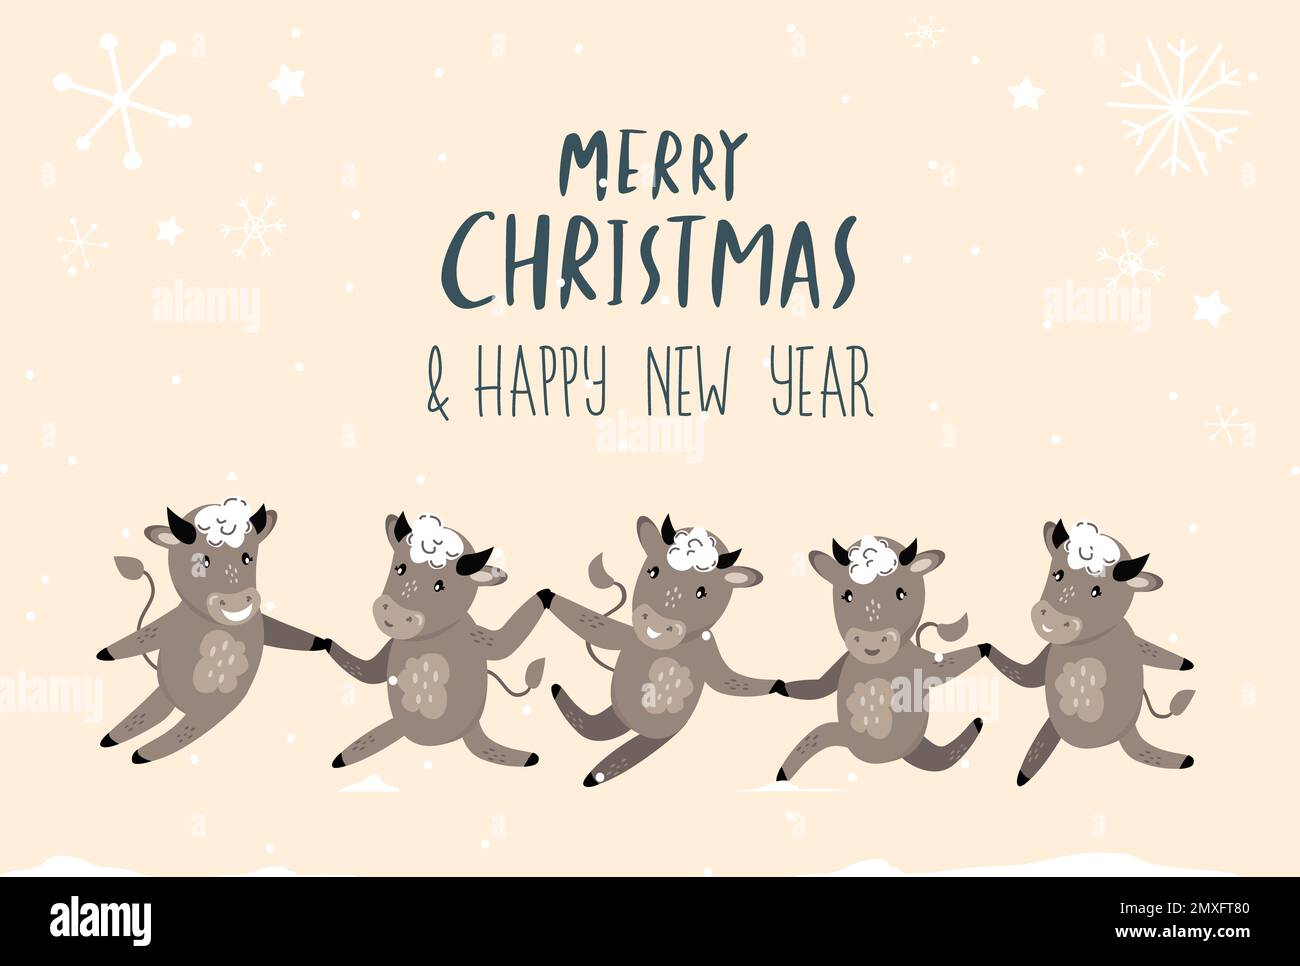 Christmas,Happy New Year Greeting Card.Cute Cartoon Bulls.Dancing Celebrating Cows Cattle.Chinese 2021 Symbol.Set of Funny Cute Holiday Animals.Design Stock Photo